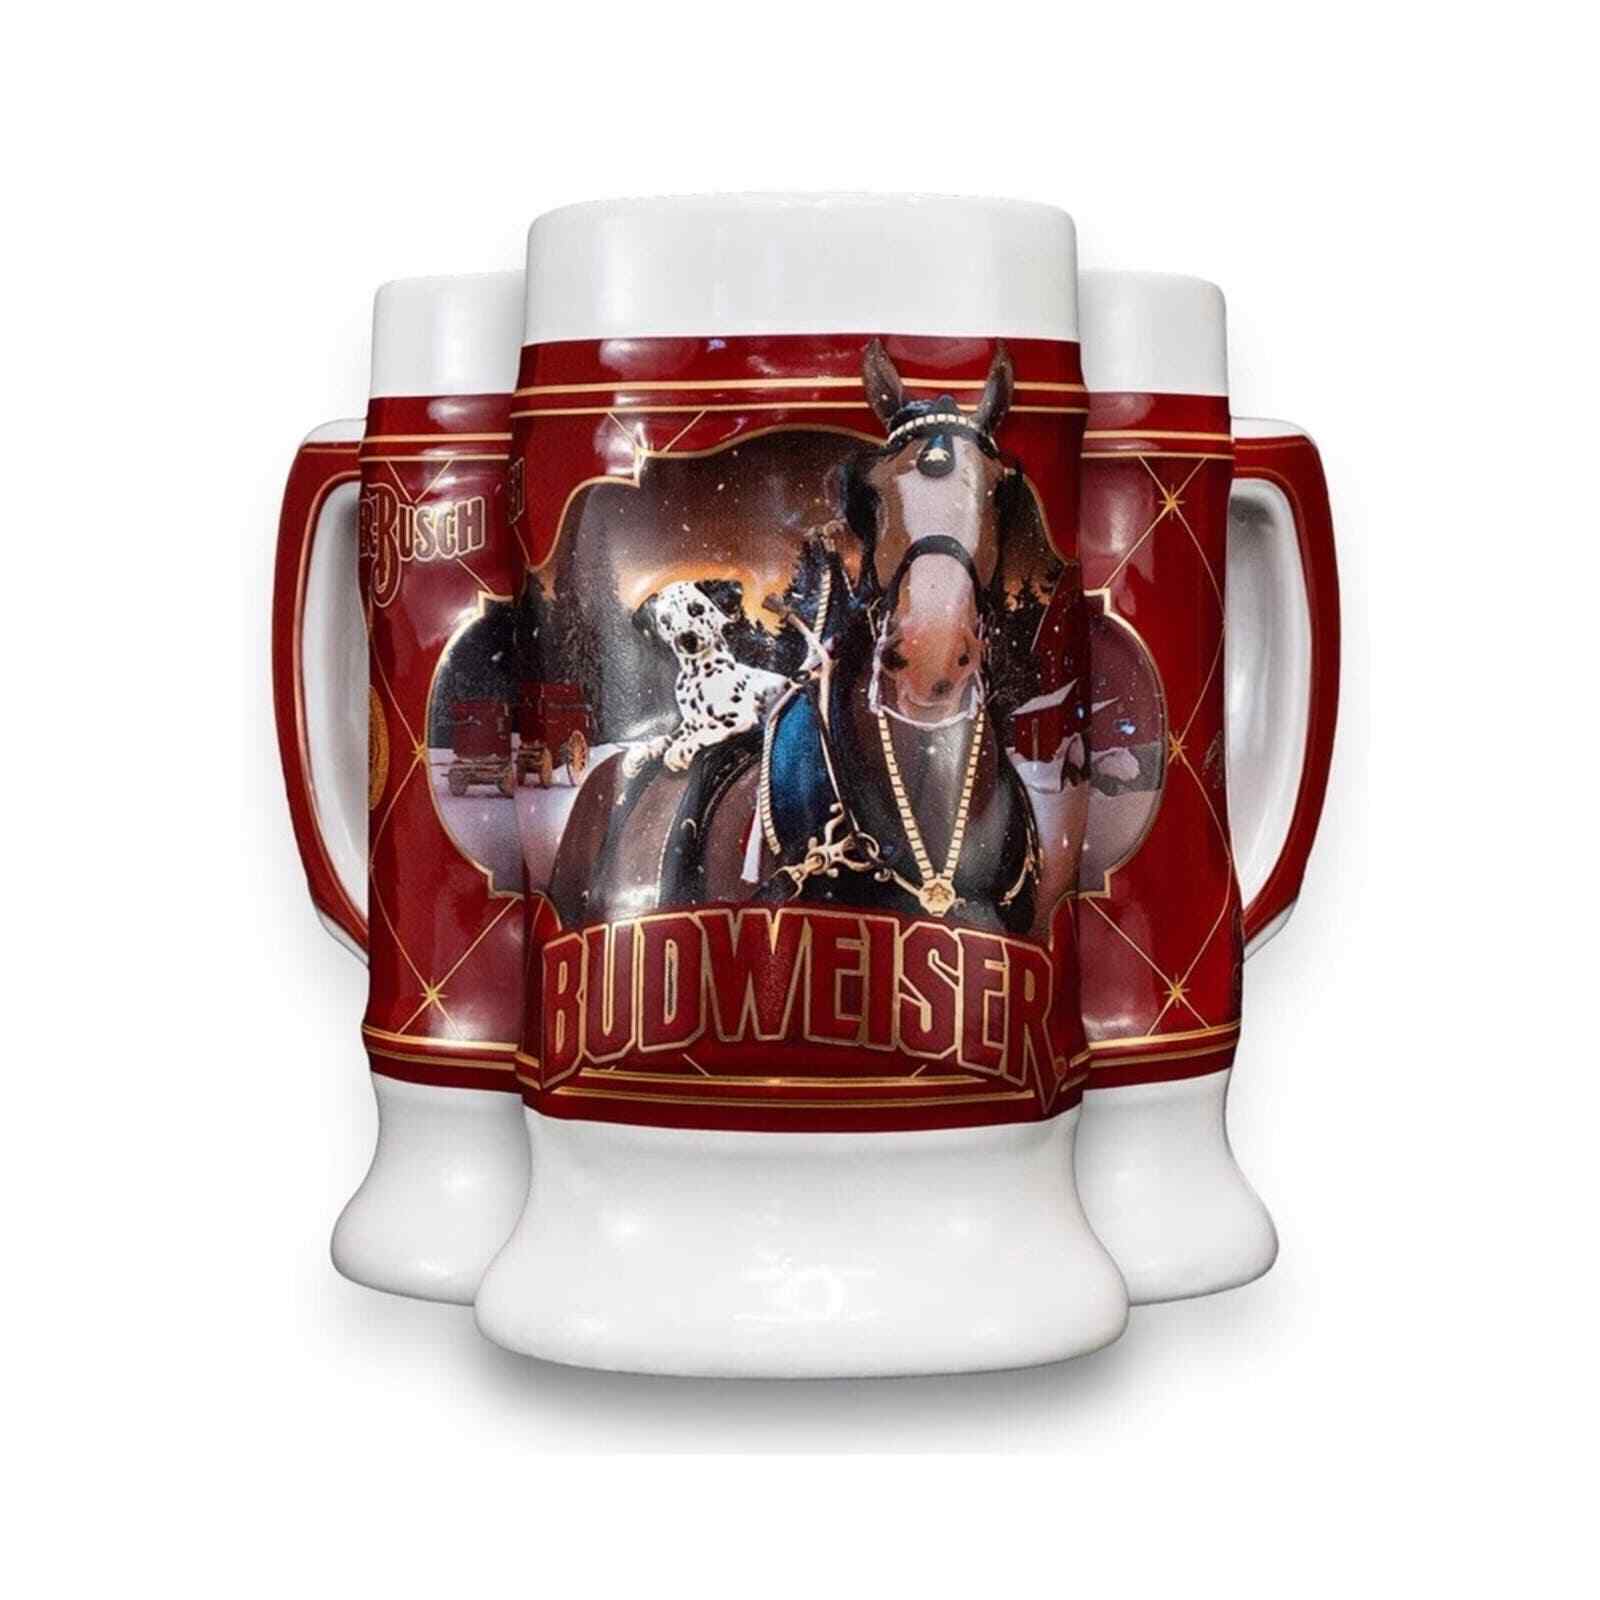 NEW 2022 Budweiser Limited Edition Collector SERIES #43 Clydesdale Holiday Stein